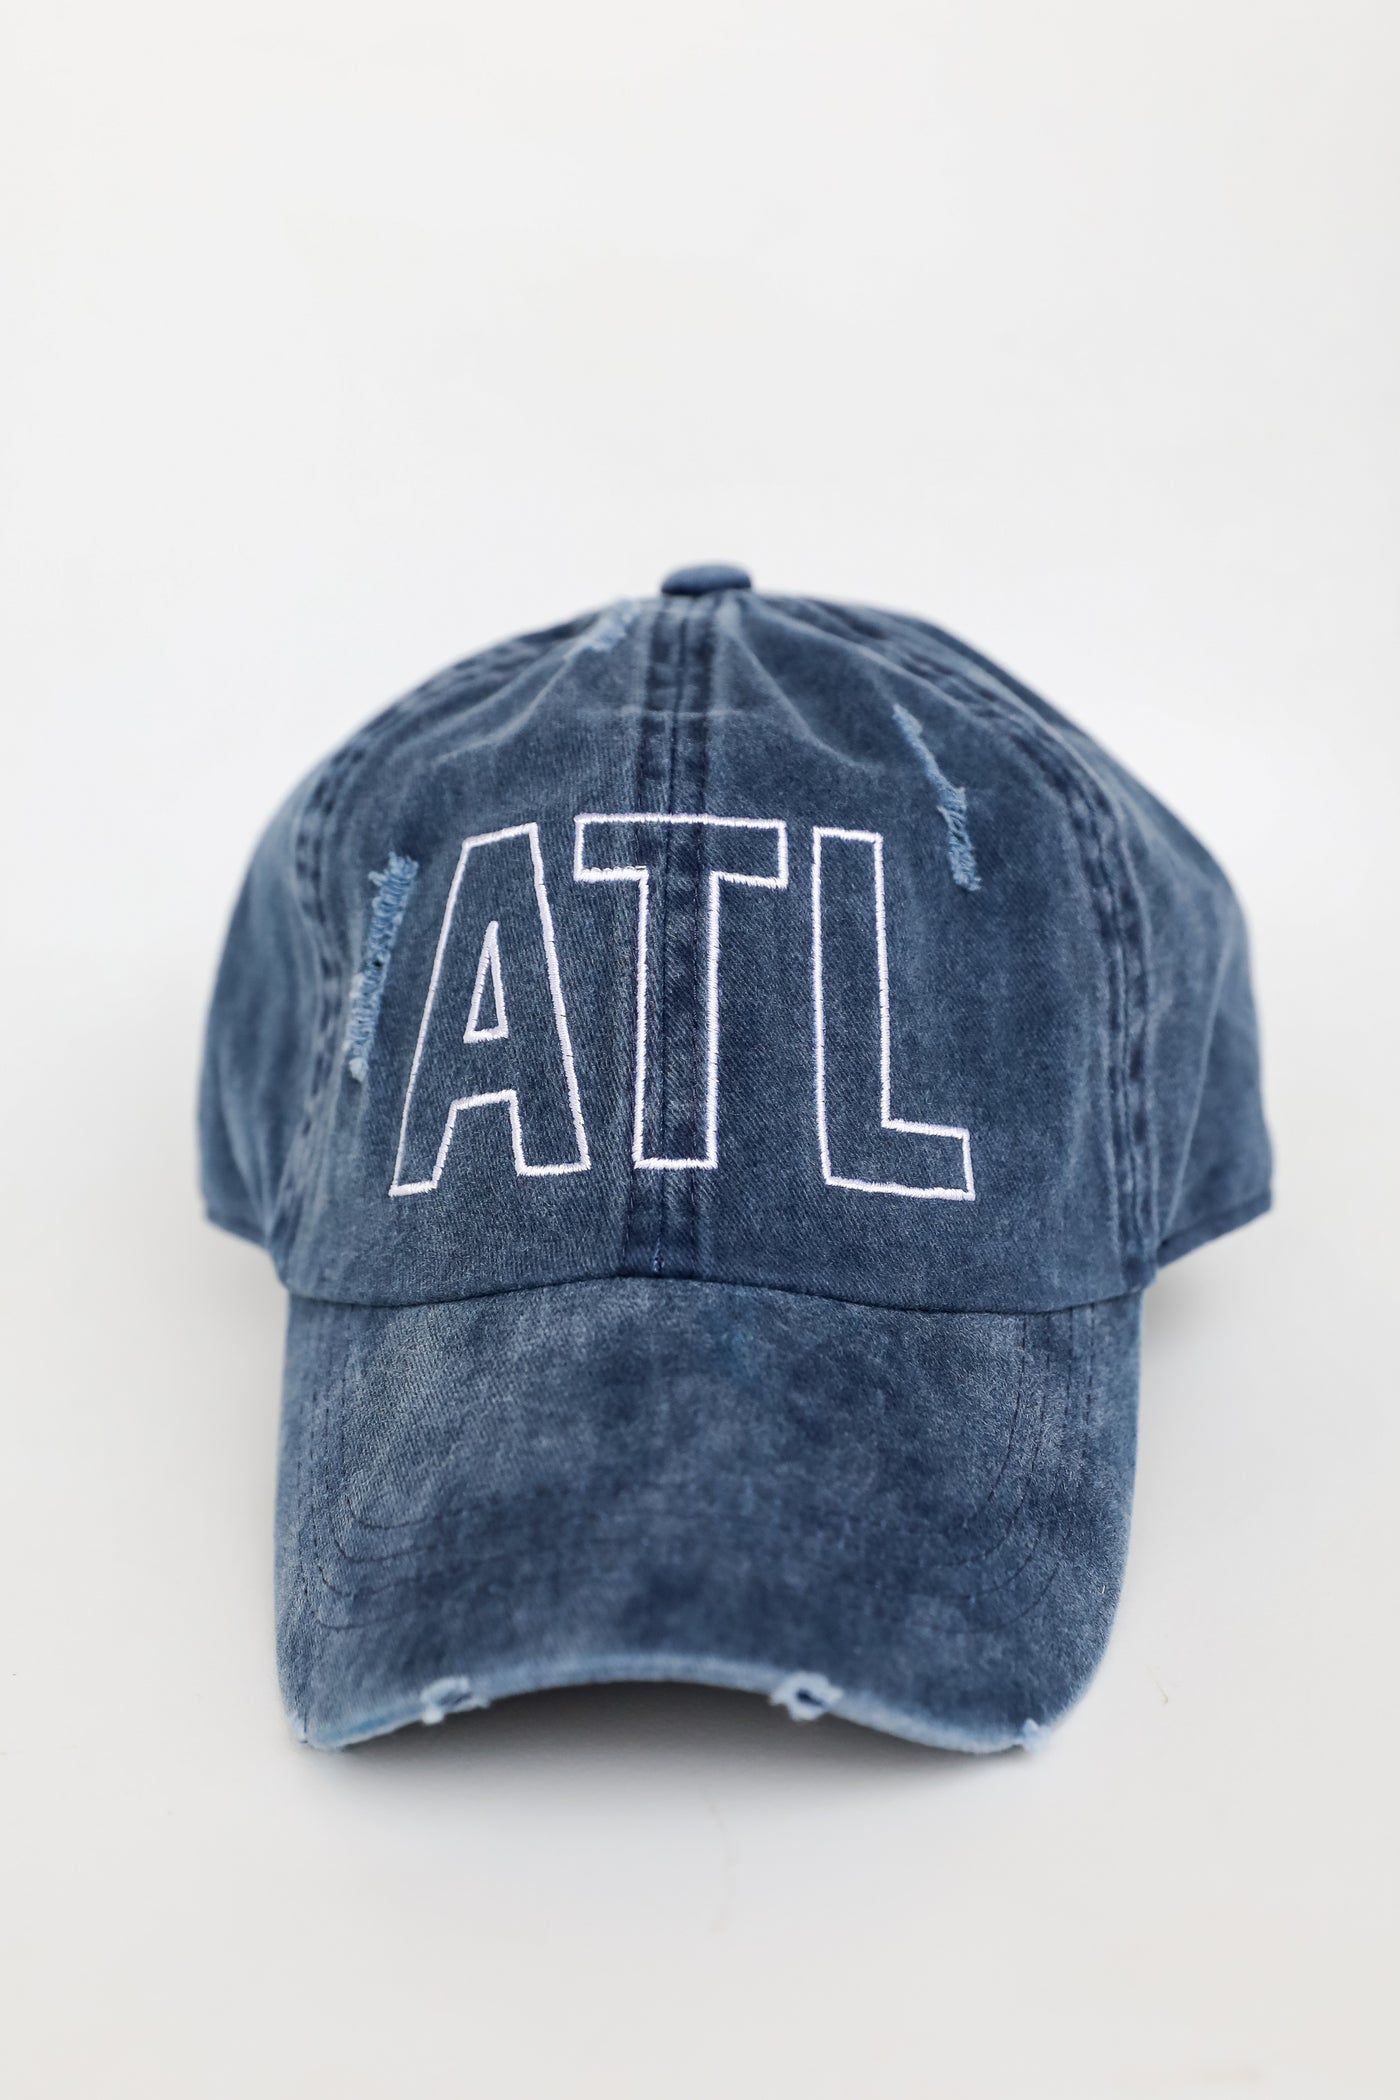 ATL Distressed Embroidered Hat